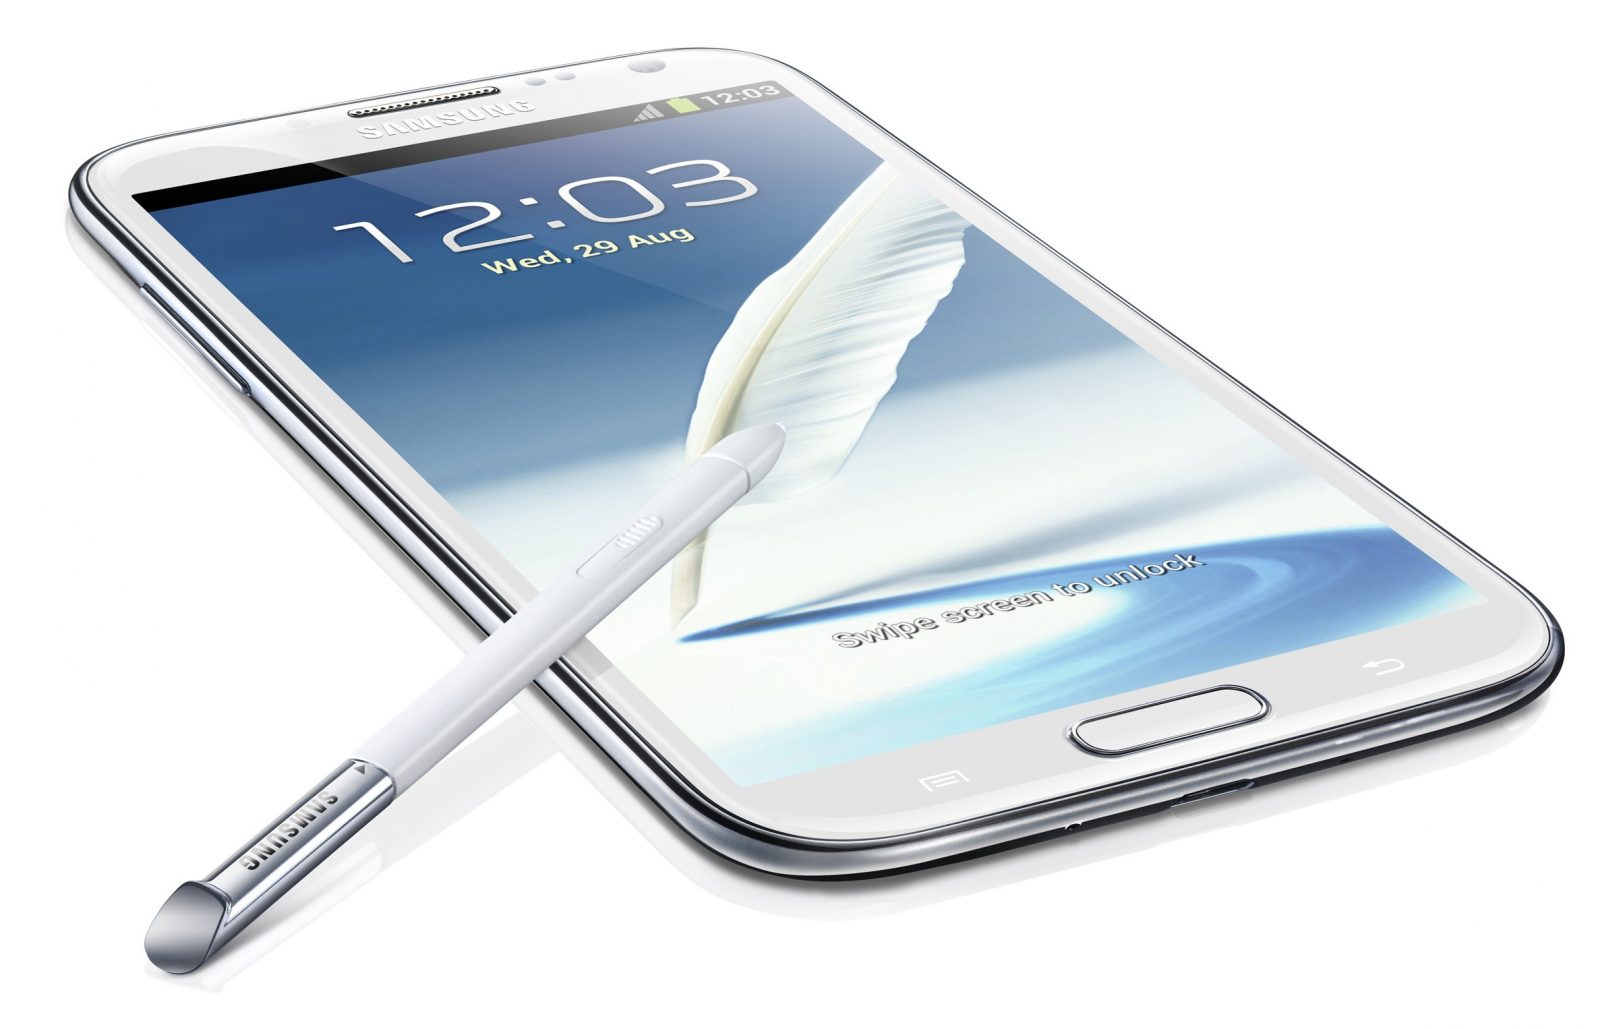 Samsung Galaxy Note 3: 6 Things To Love